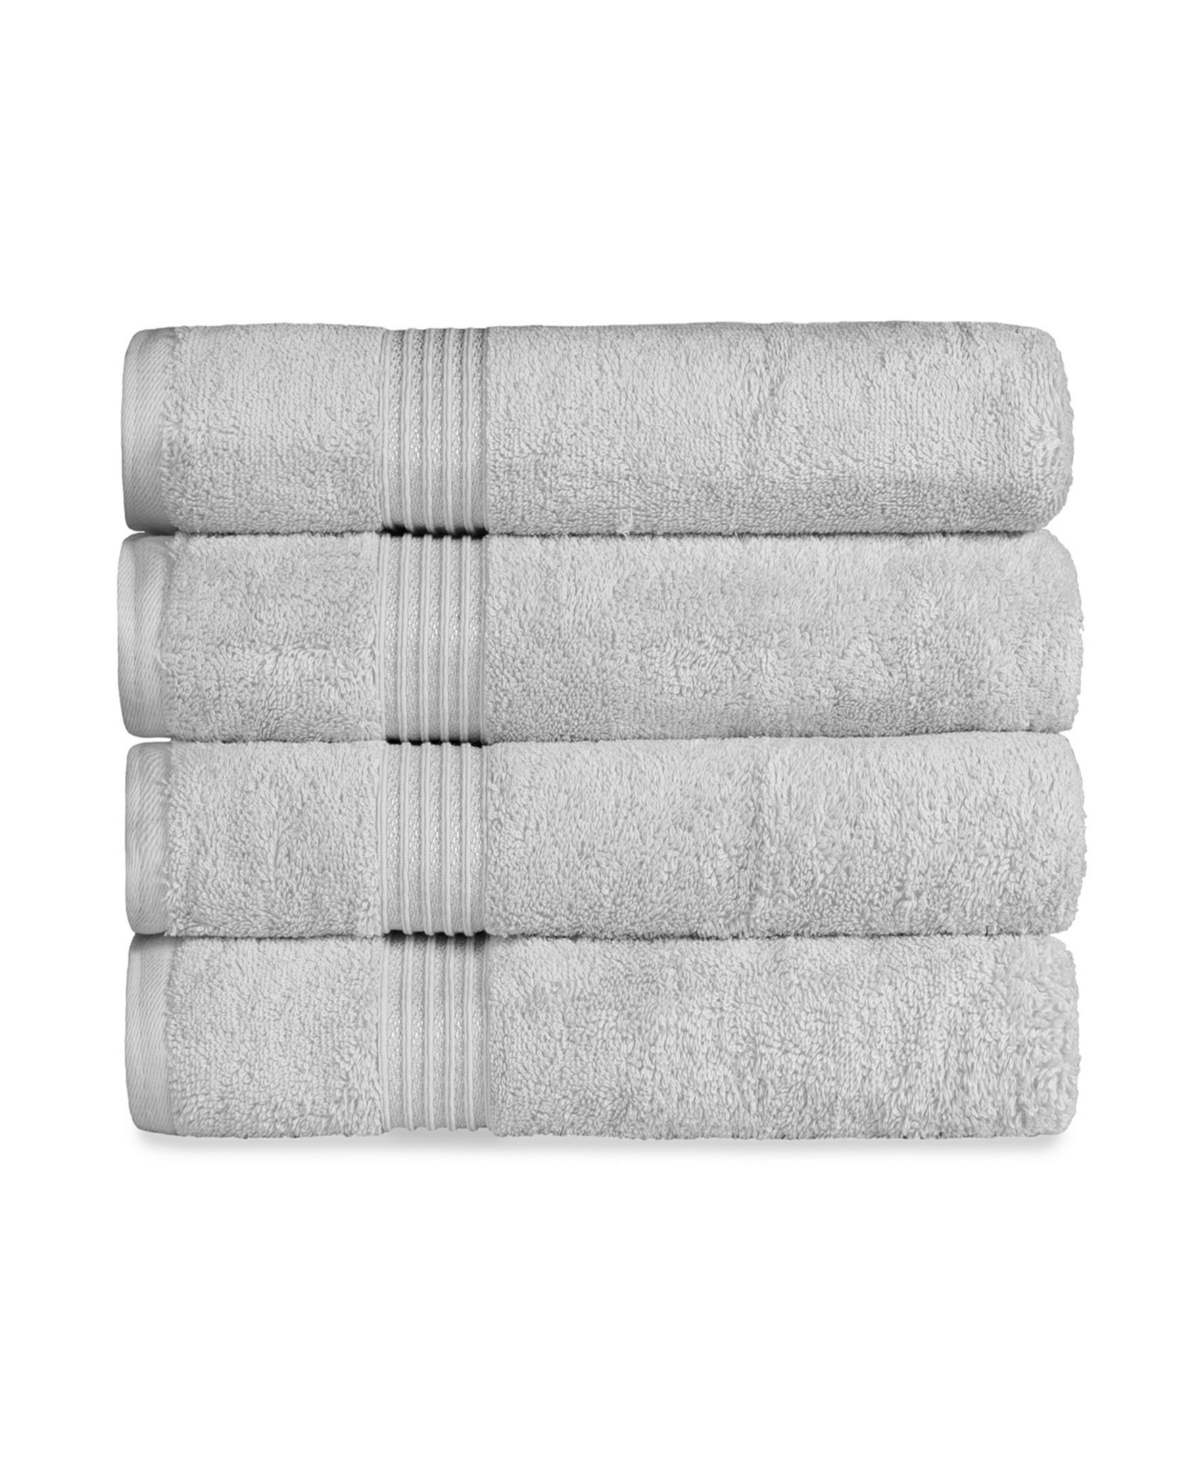 Superior Solid Quick Drying Absorbent 4 Piece Egyptian Cotton Bath Towel Set Bedding In Silver